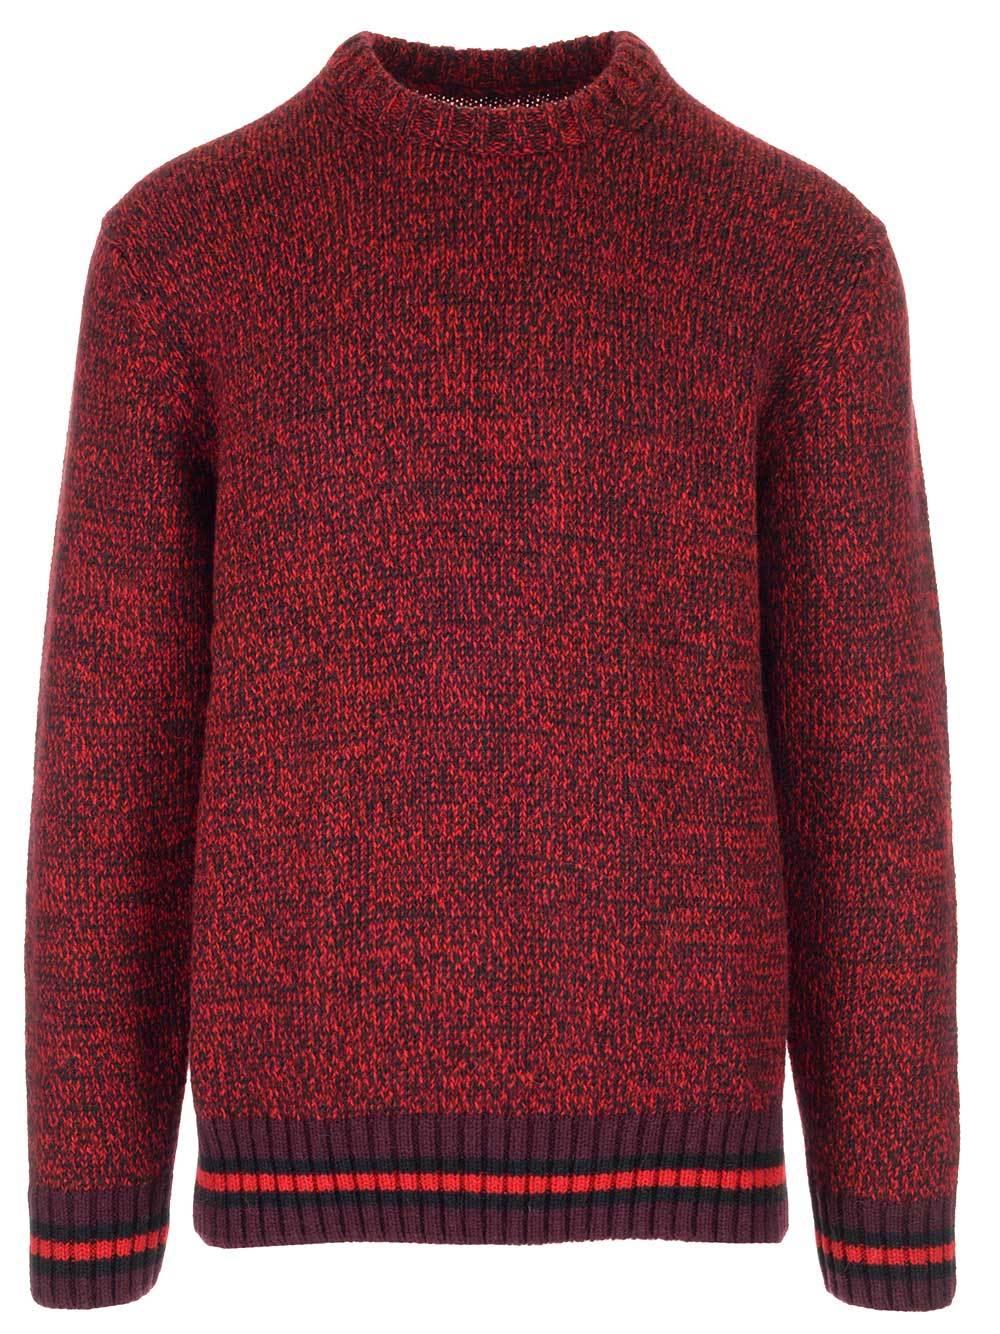 Woolrich Synthetic Pullover Knitted Jumper in Red for Men - Lyst